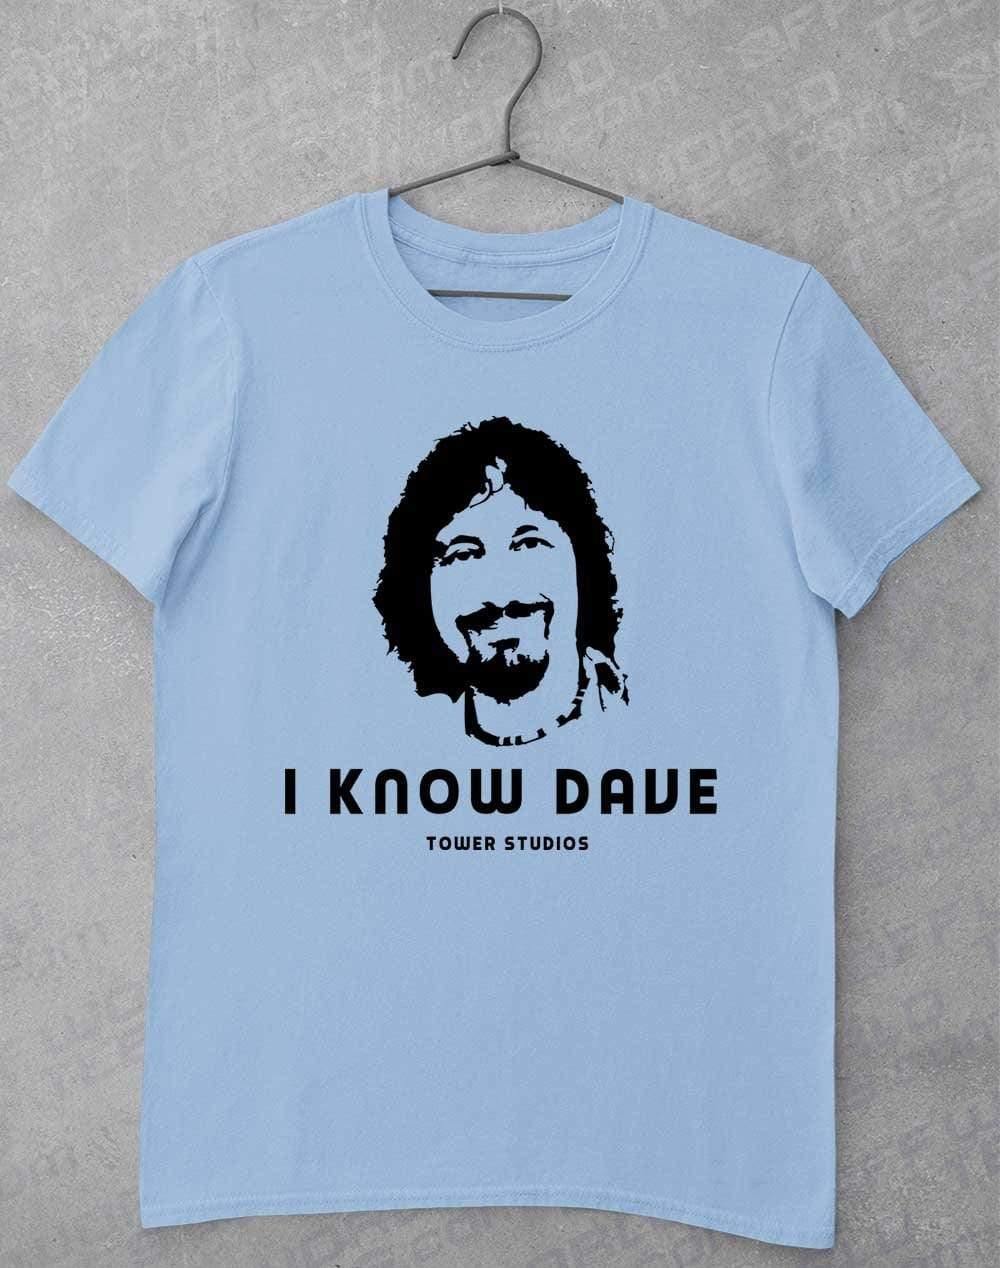 Tower Studios I Know Dave T-Shirt S / Light Blue  - Off World Tees